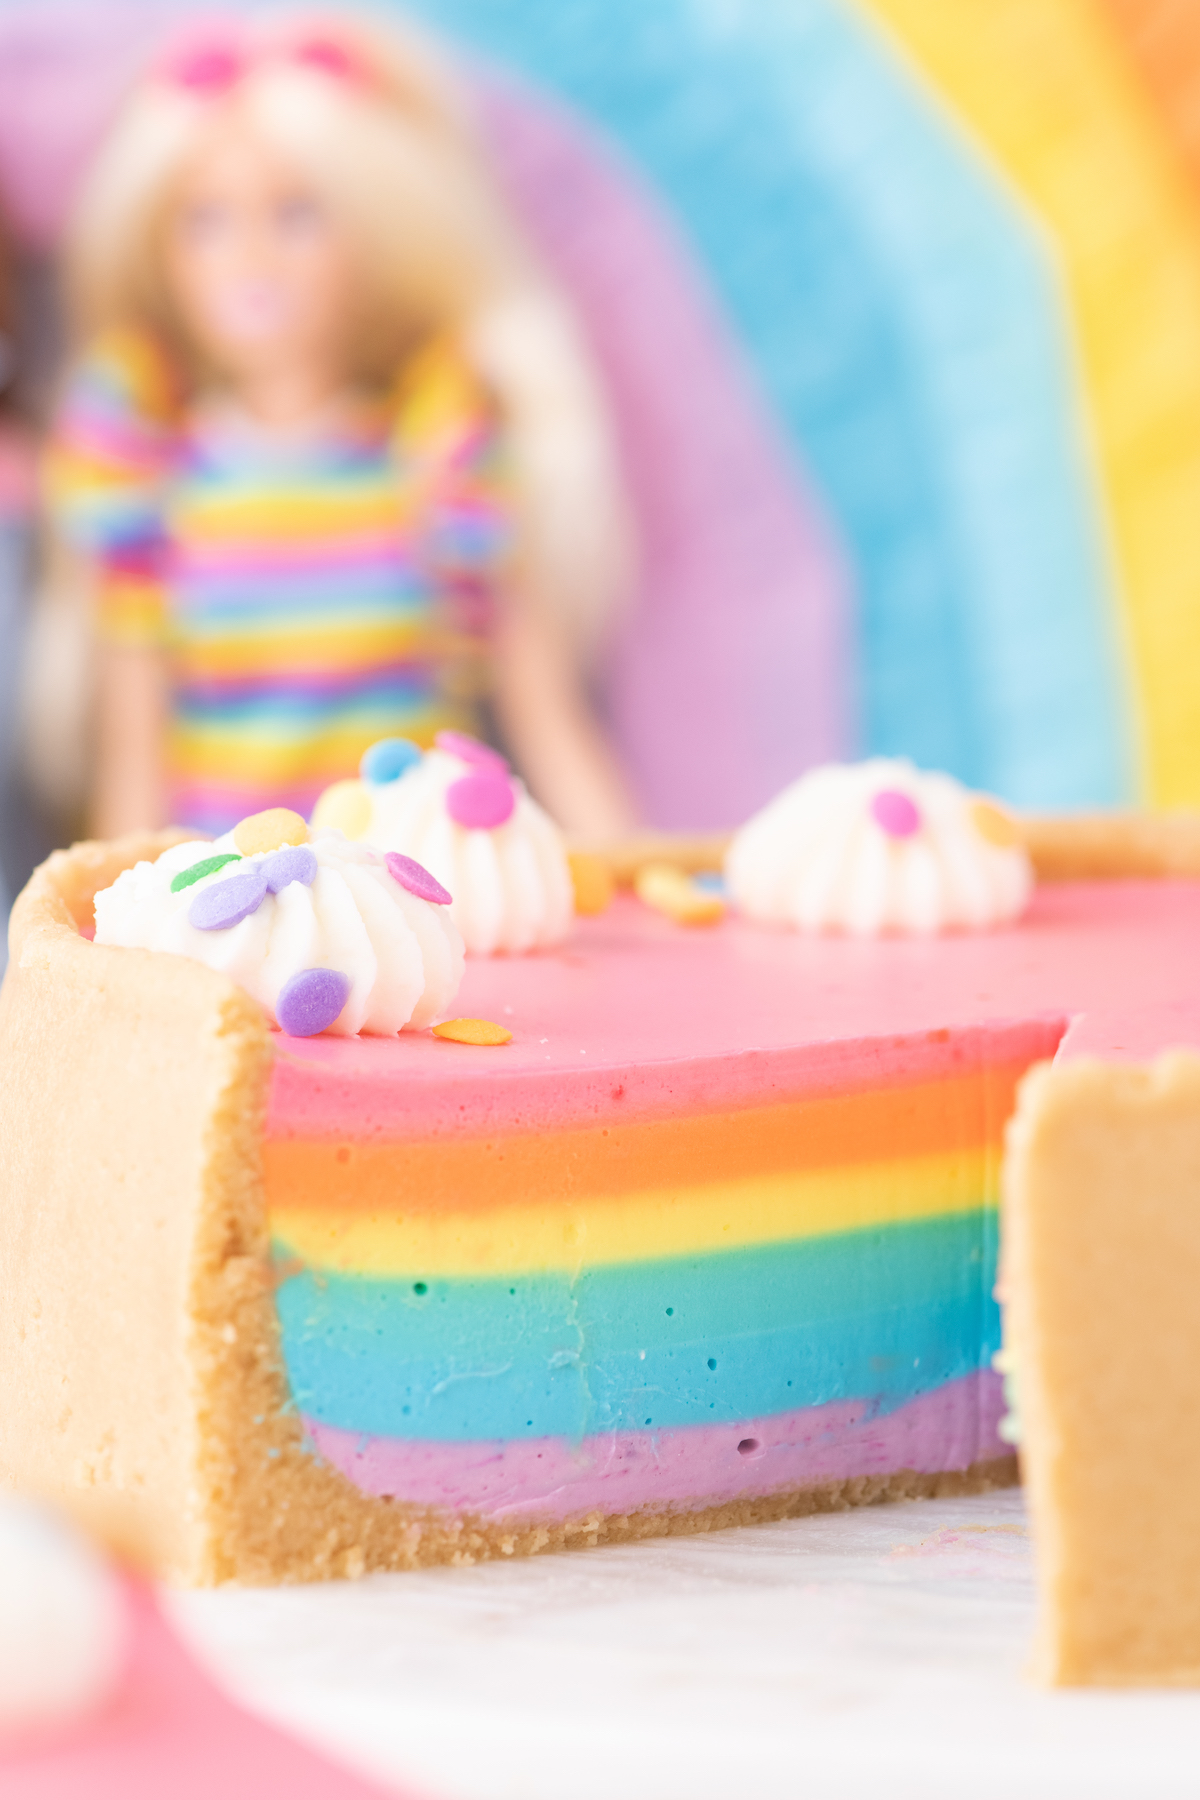 A no-bake cheesecake fit for a Barbie party - with all the colors of the rainbow.